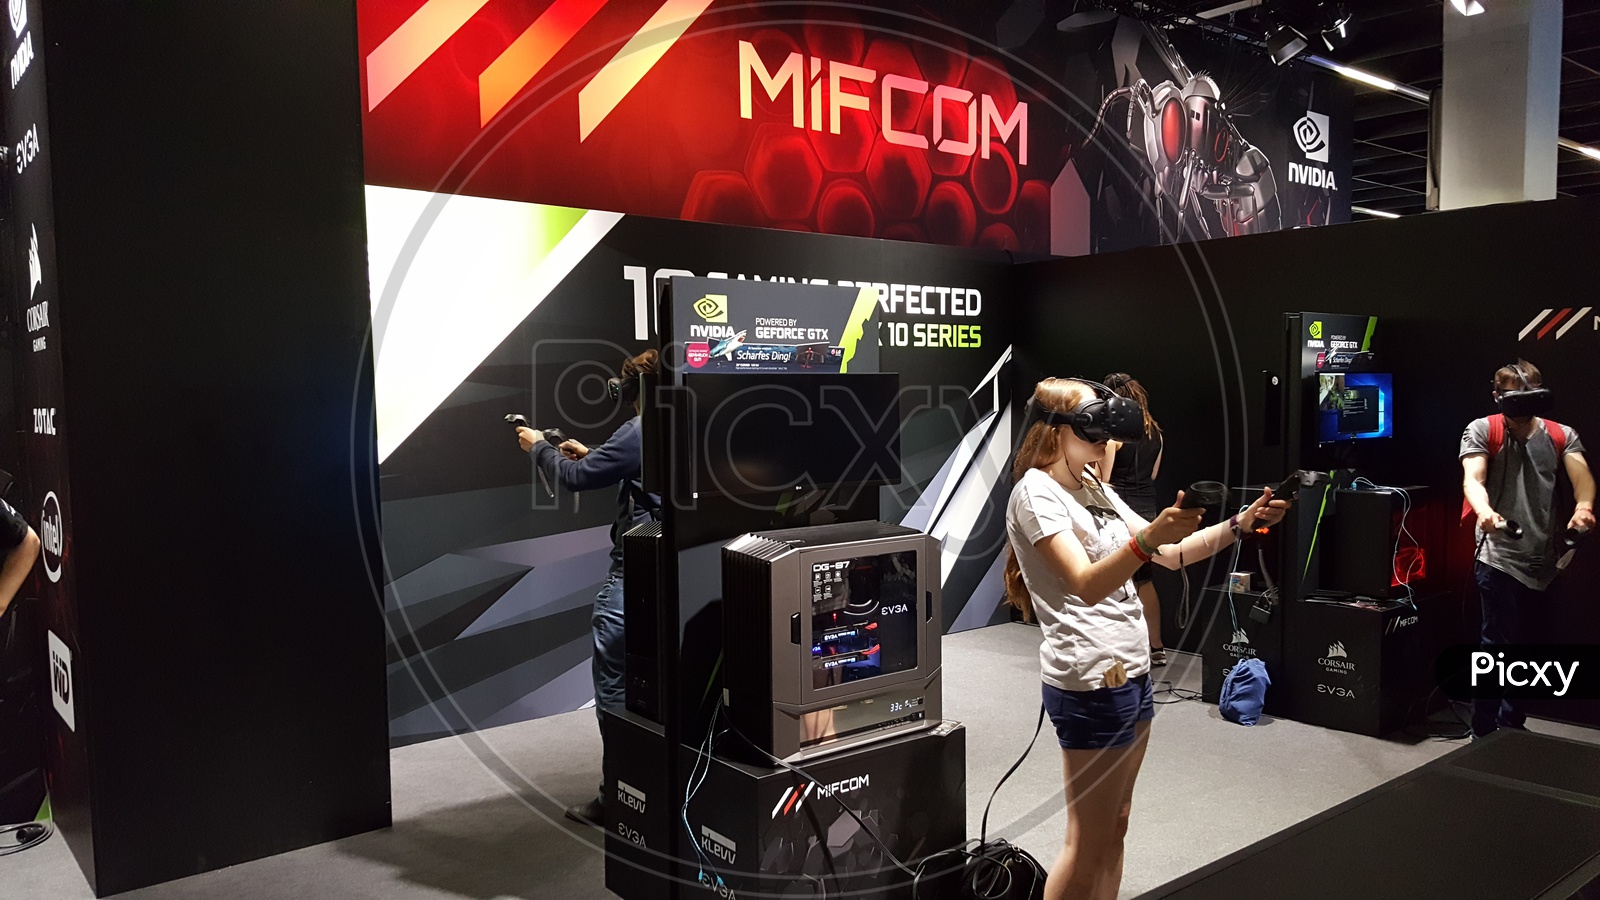 People using MiFCOM Virtual Reality Headsets for Games